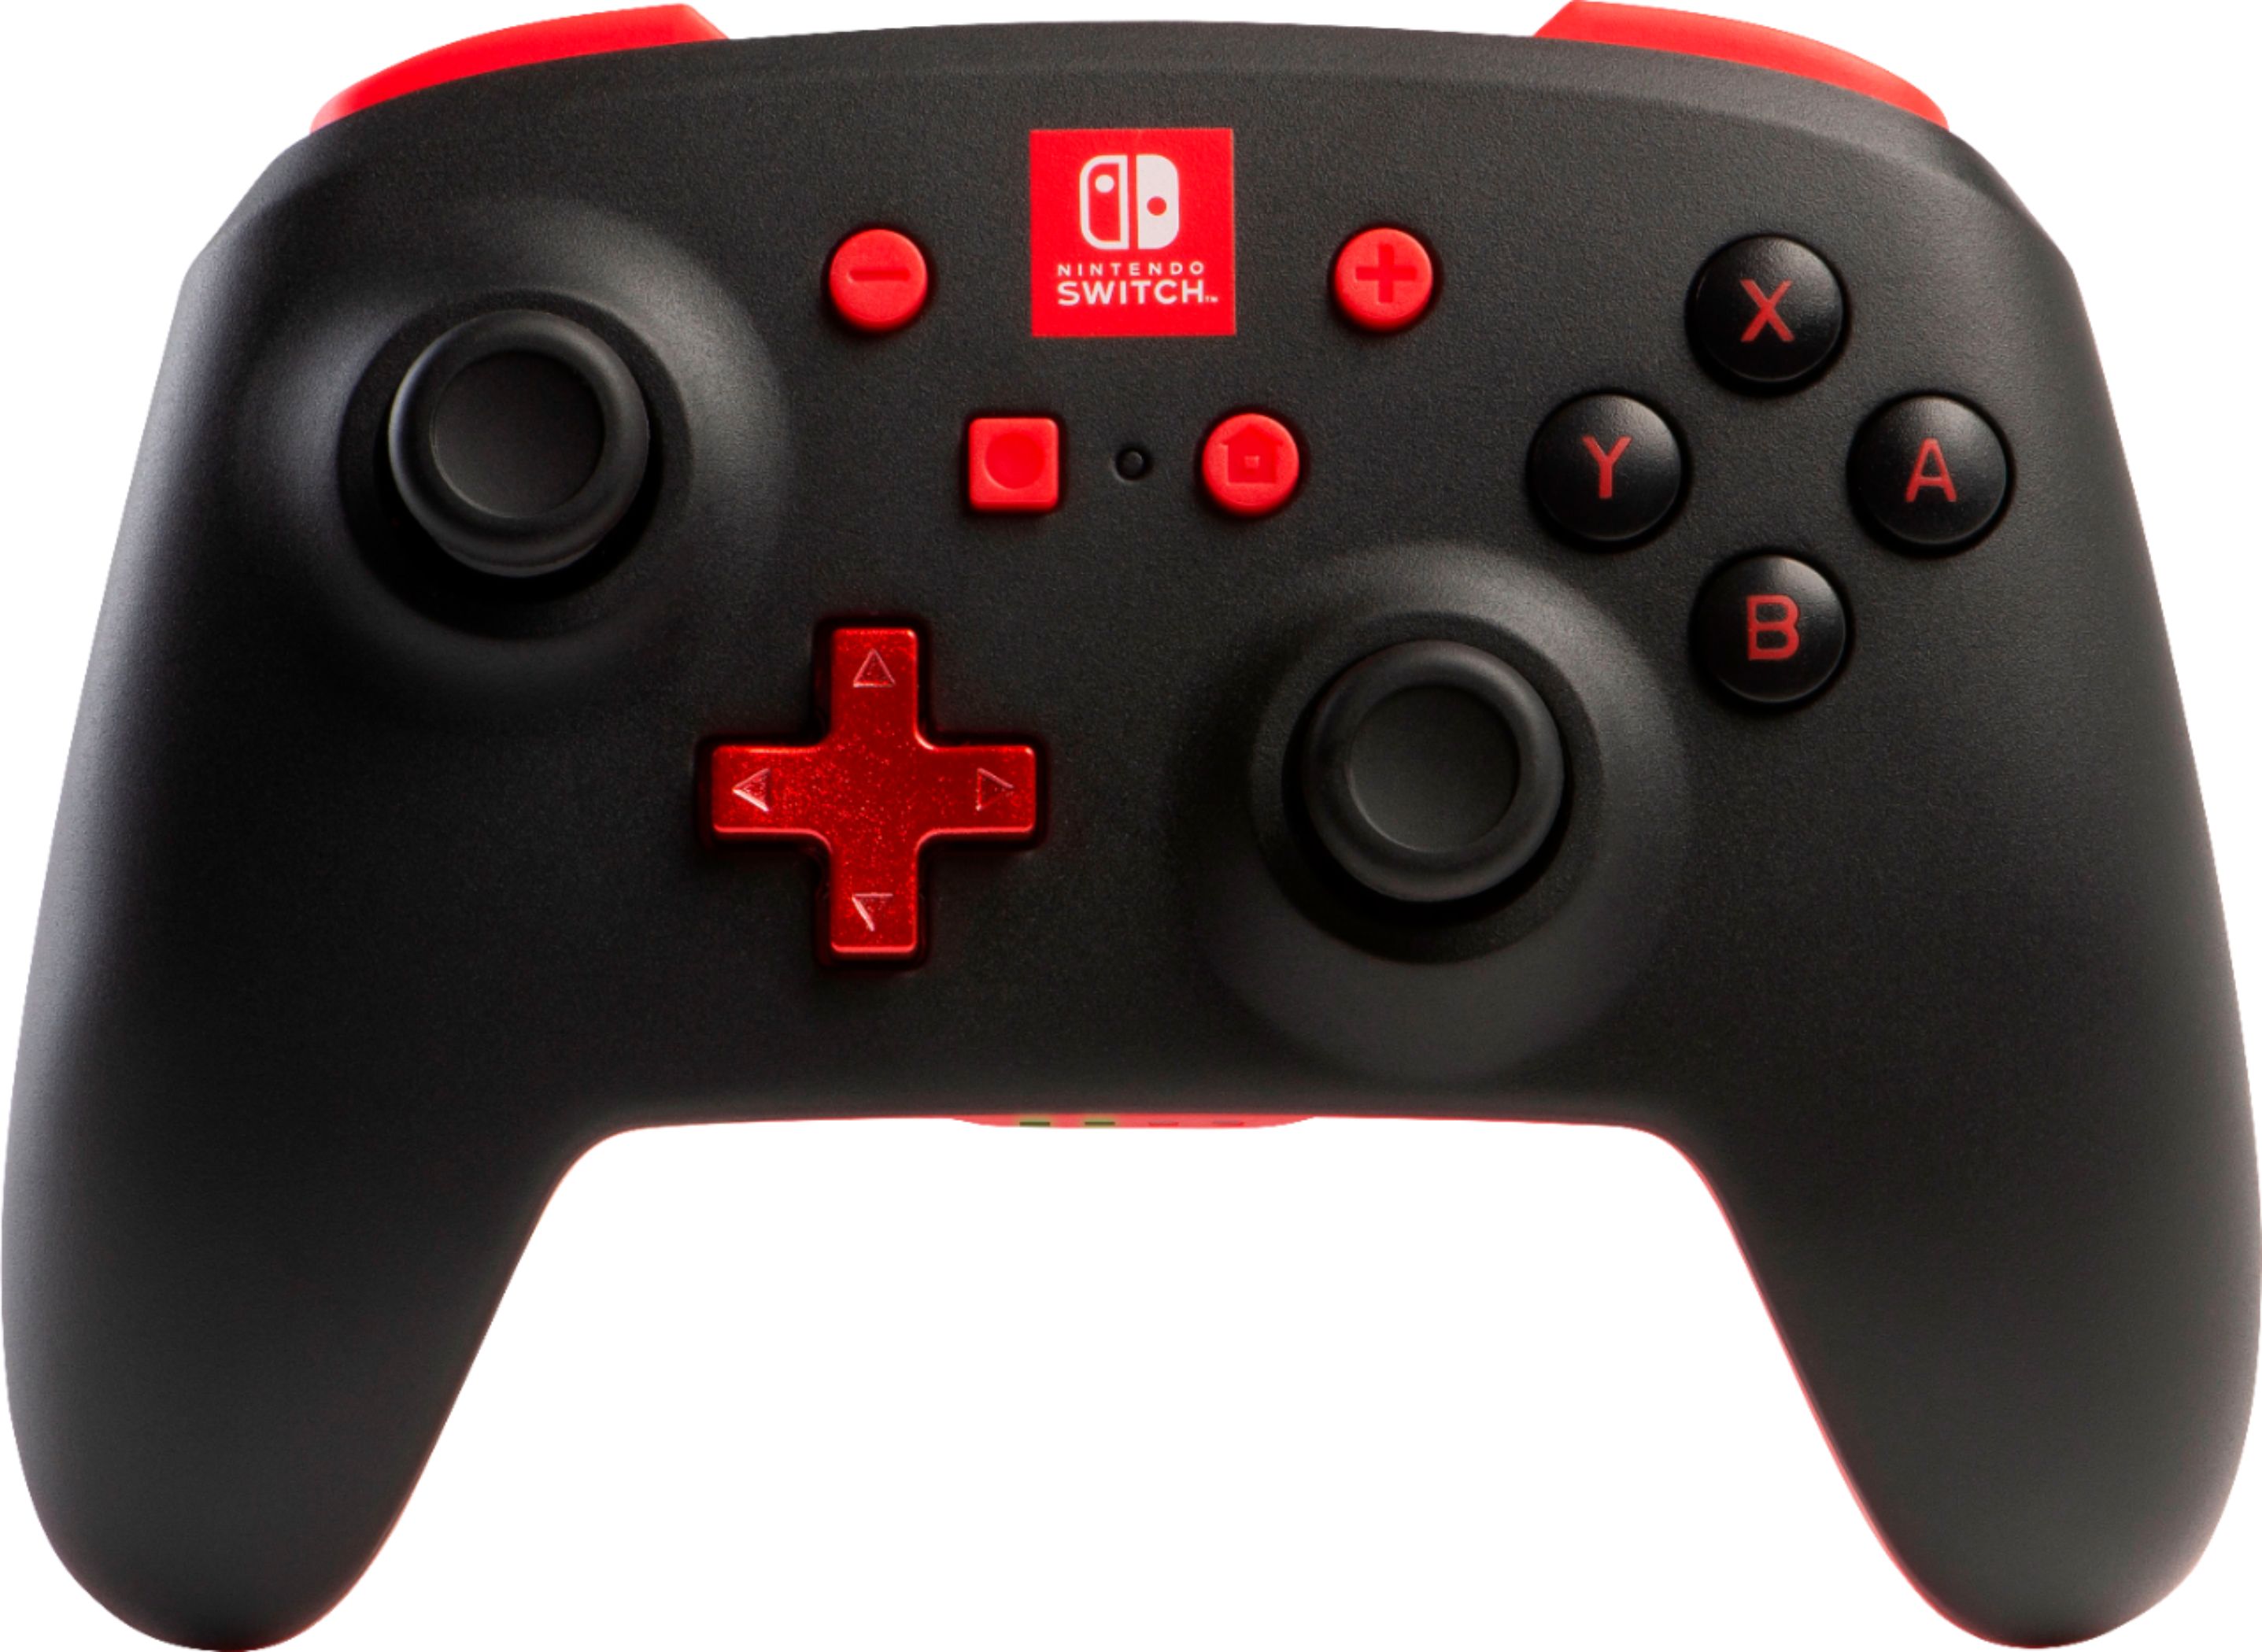 PowerA - Enhanced Wireless Controller for Nintendo Switch - Black With Red Accents